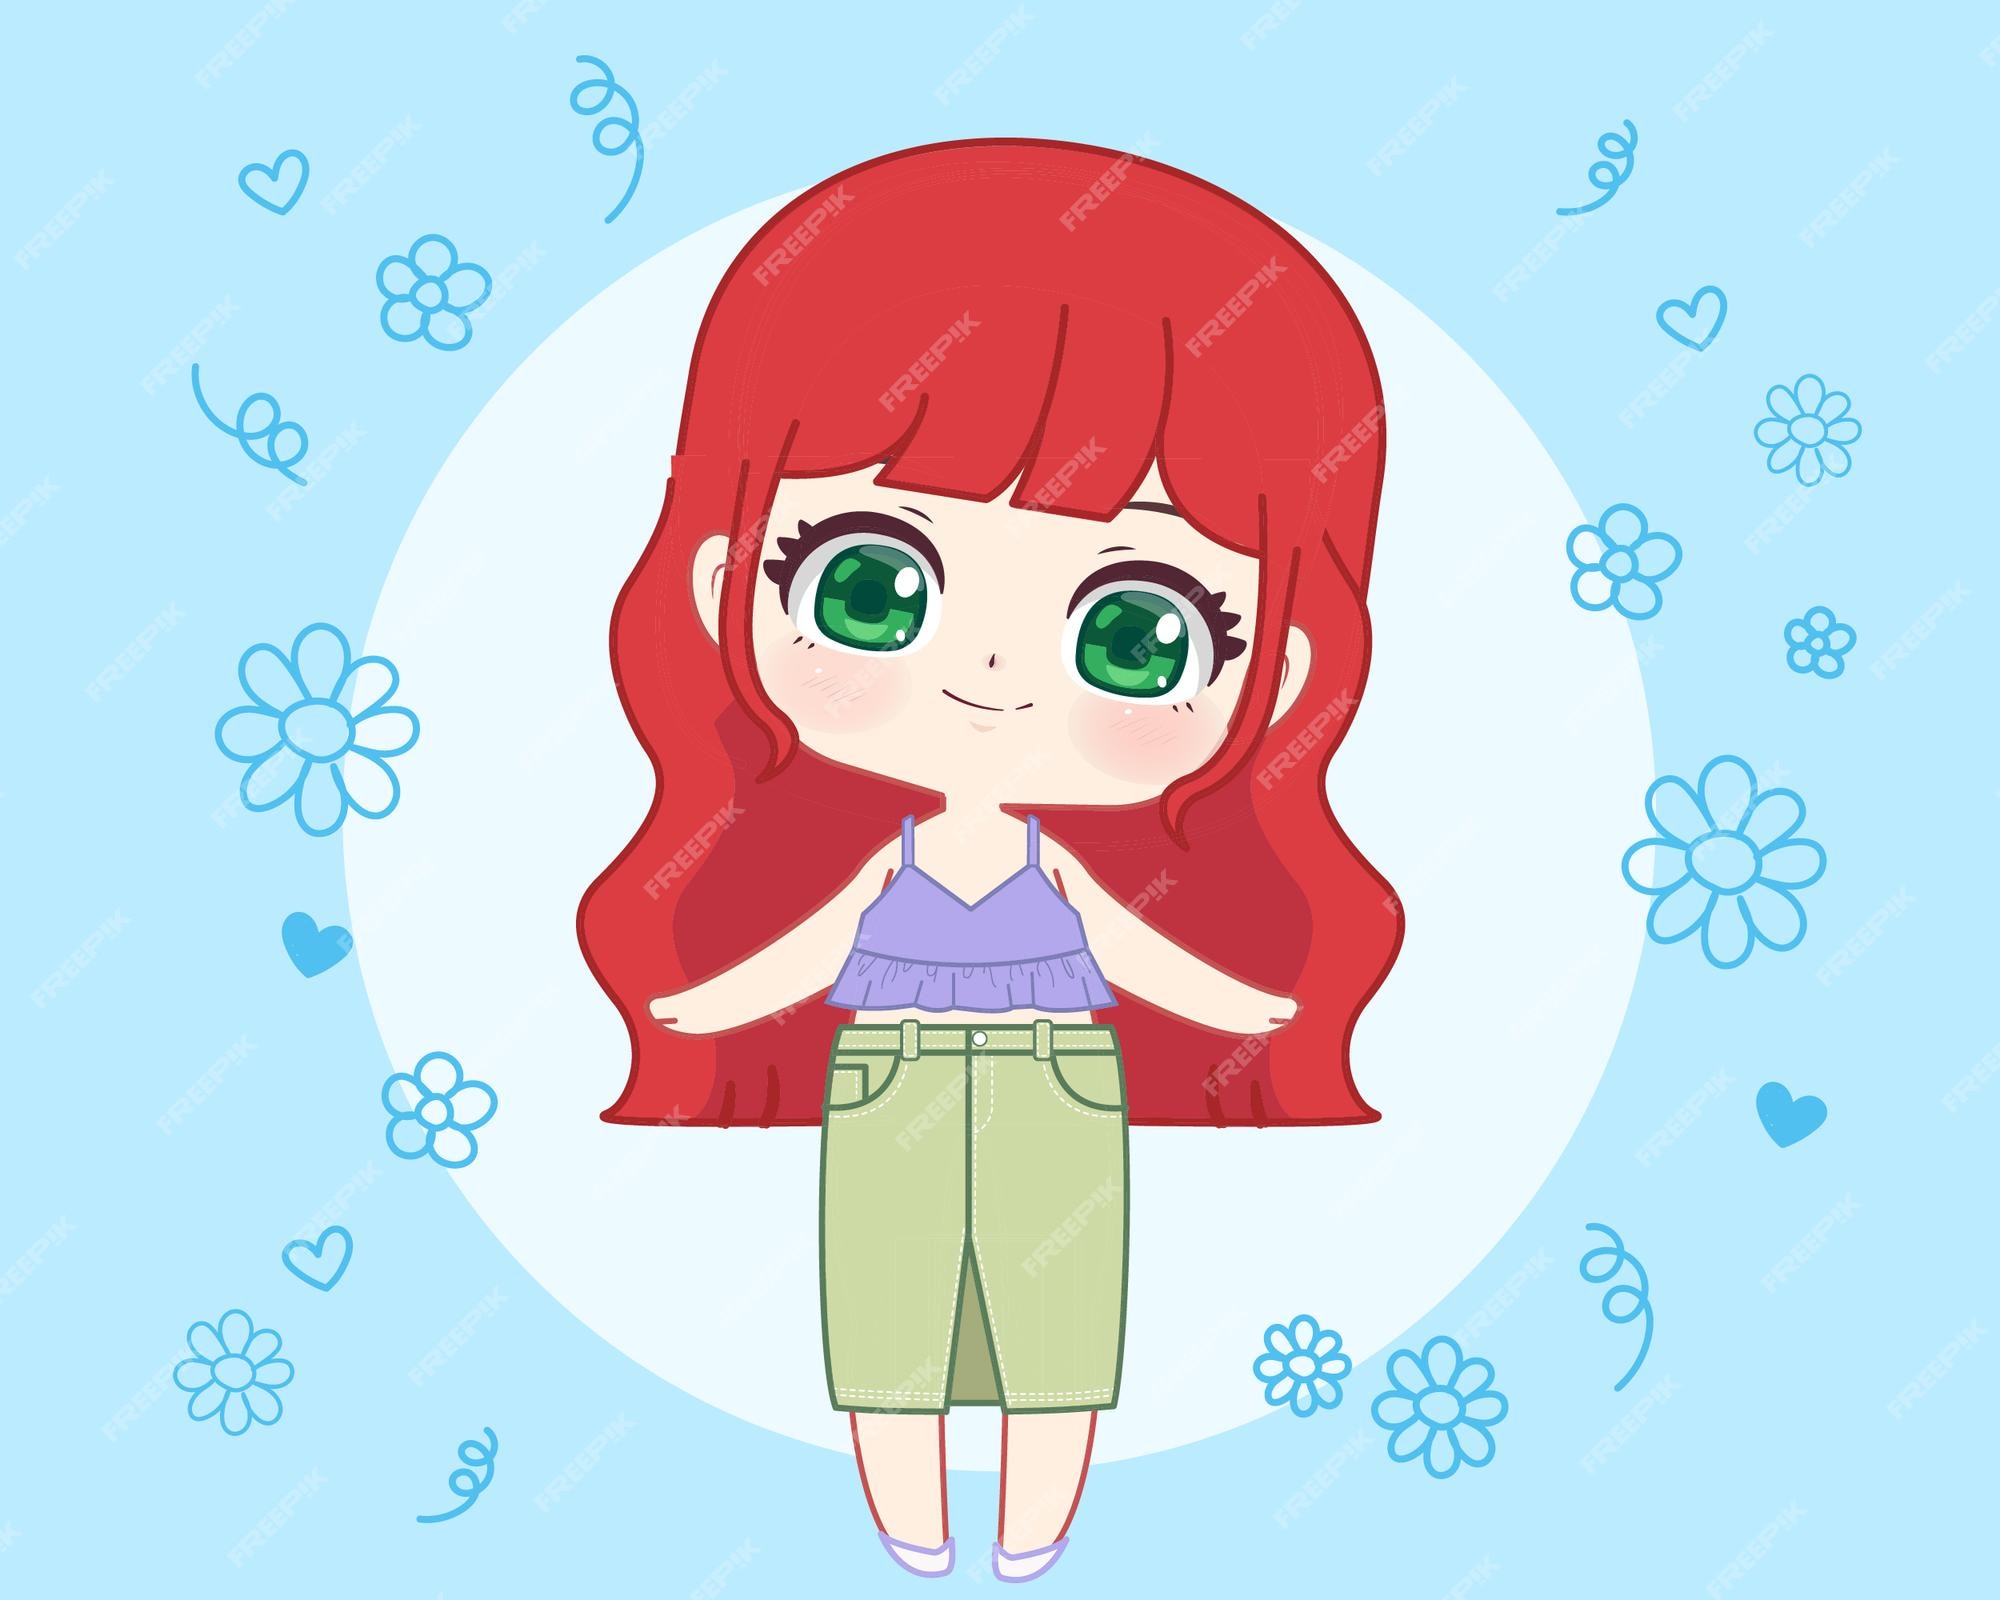 Chibi Character with Blue Hair - wide 9